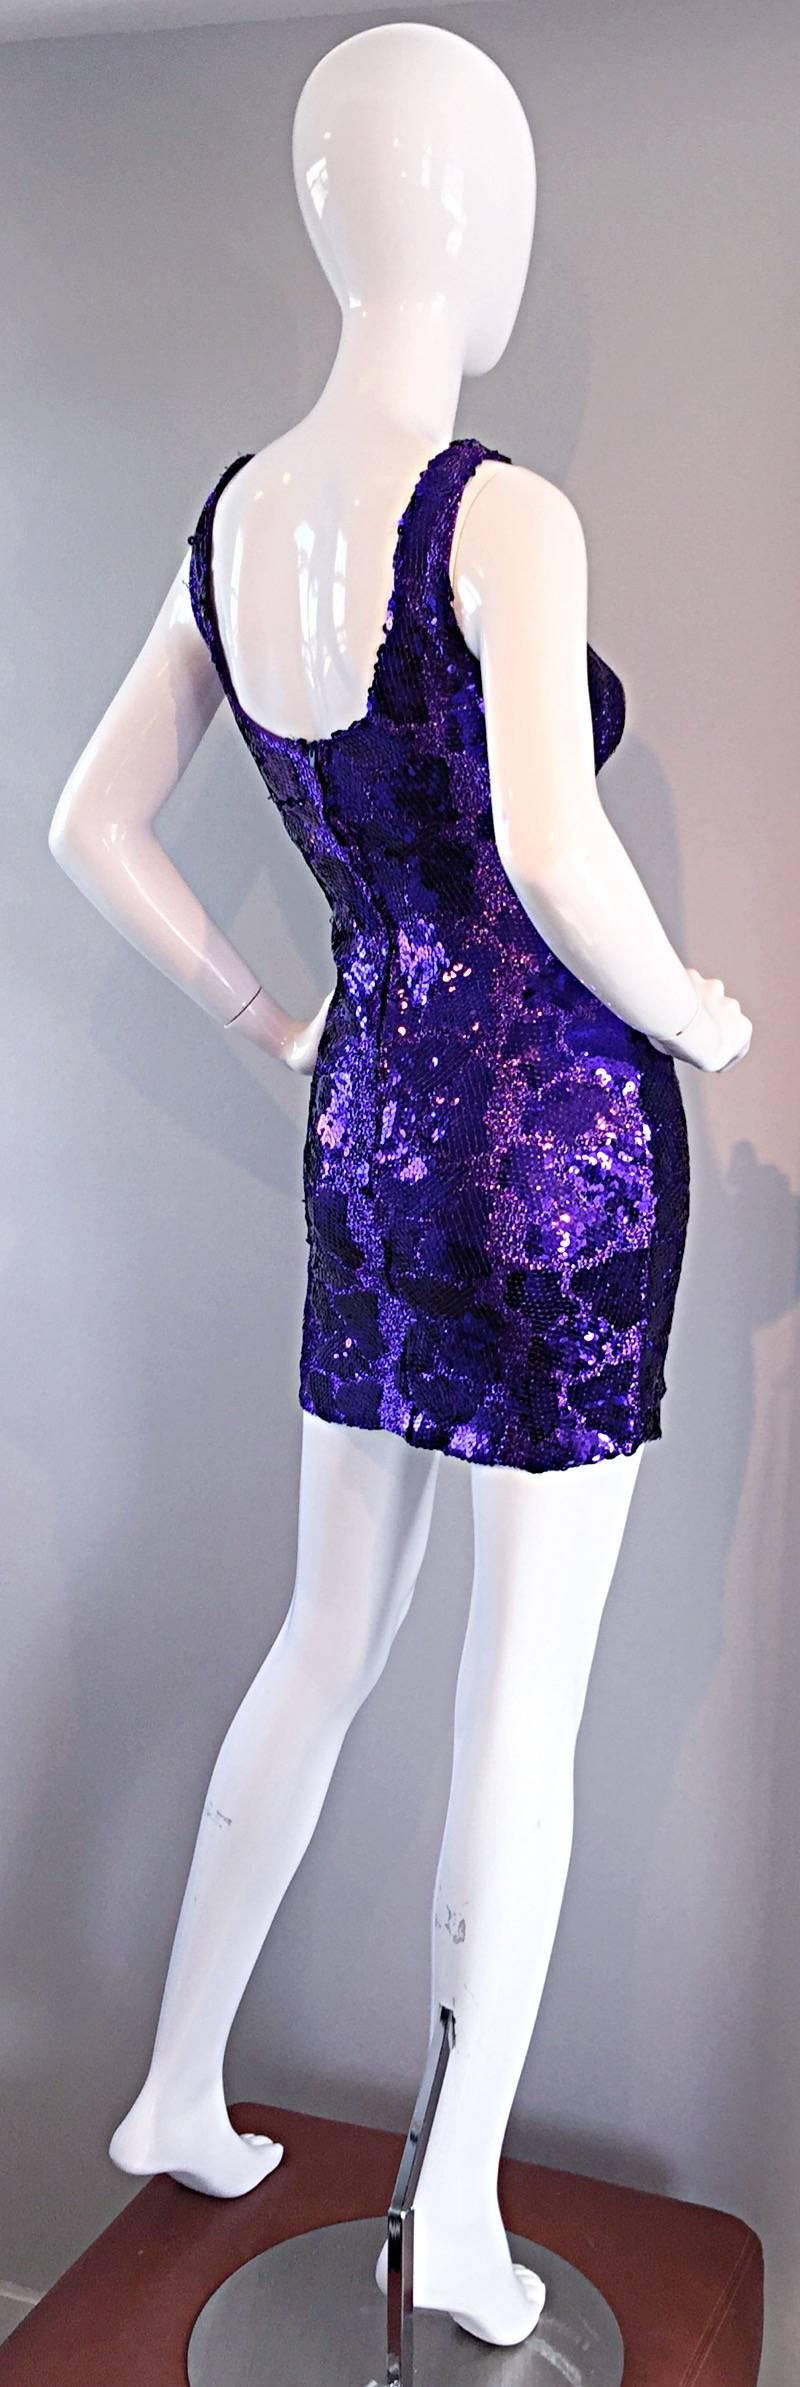 WOW! Super sexy, and very stylish purple sequin bodcon dress! All-over purple metallic, with hundreds of sequins, clustered to look like a leopard / cheetah print. Looks amazing on--hugs the body in all the right places! Well made, with a hidden